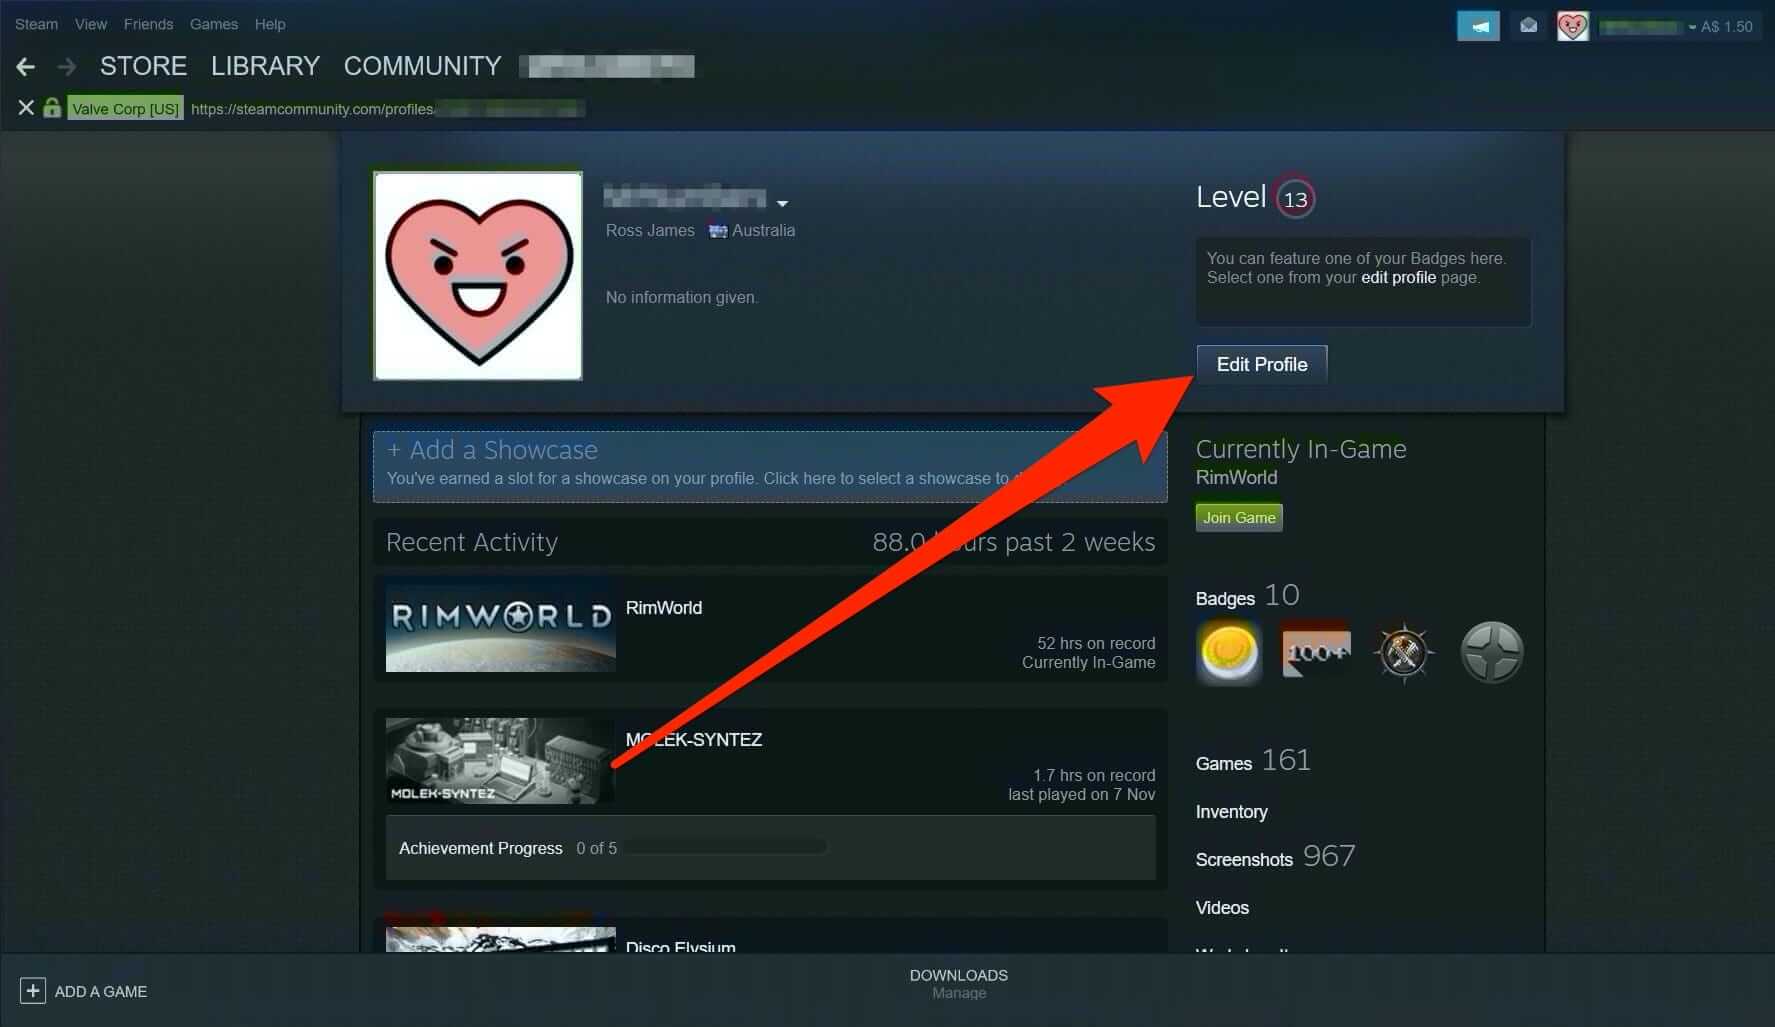 How to Hide Games From Friends in Steam